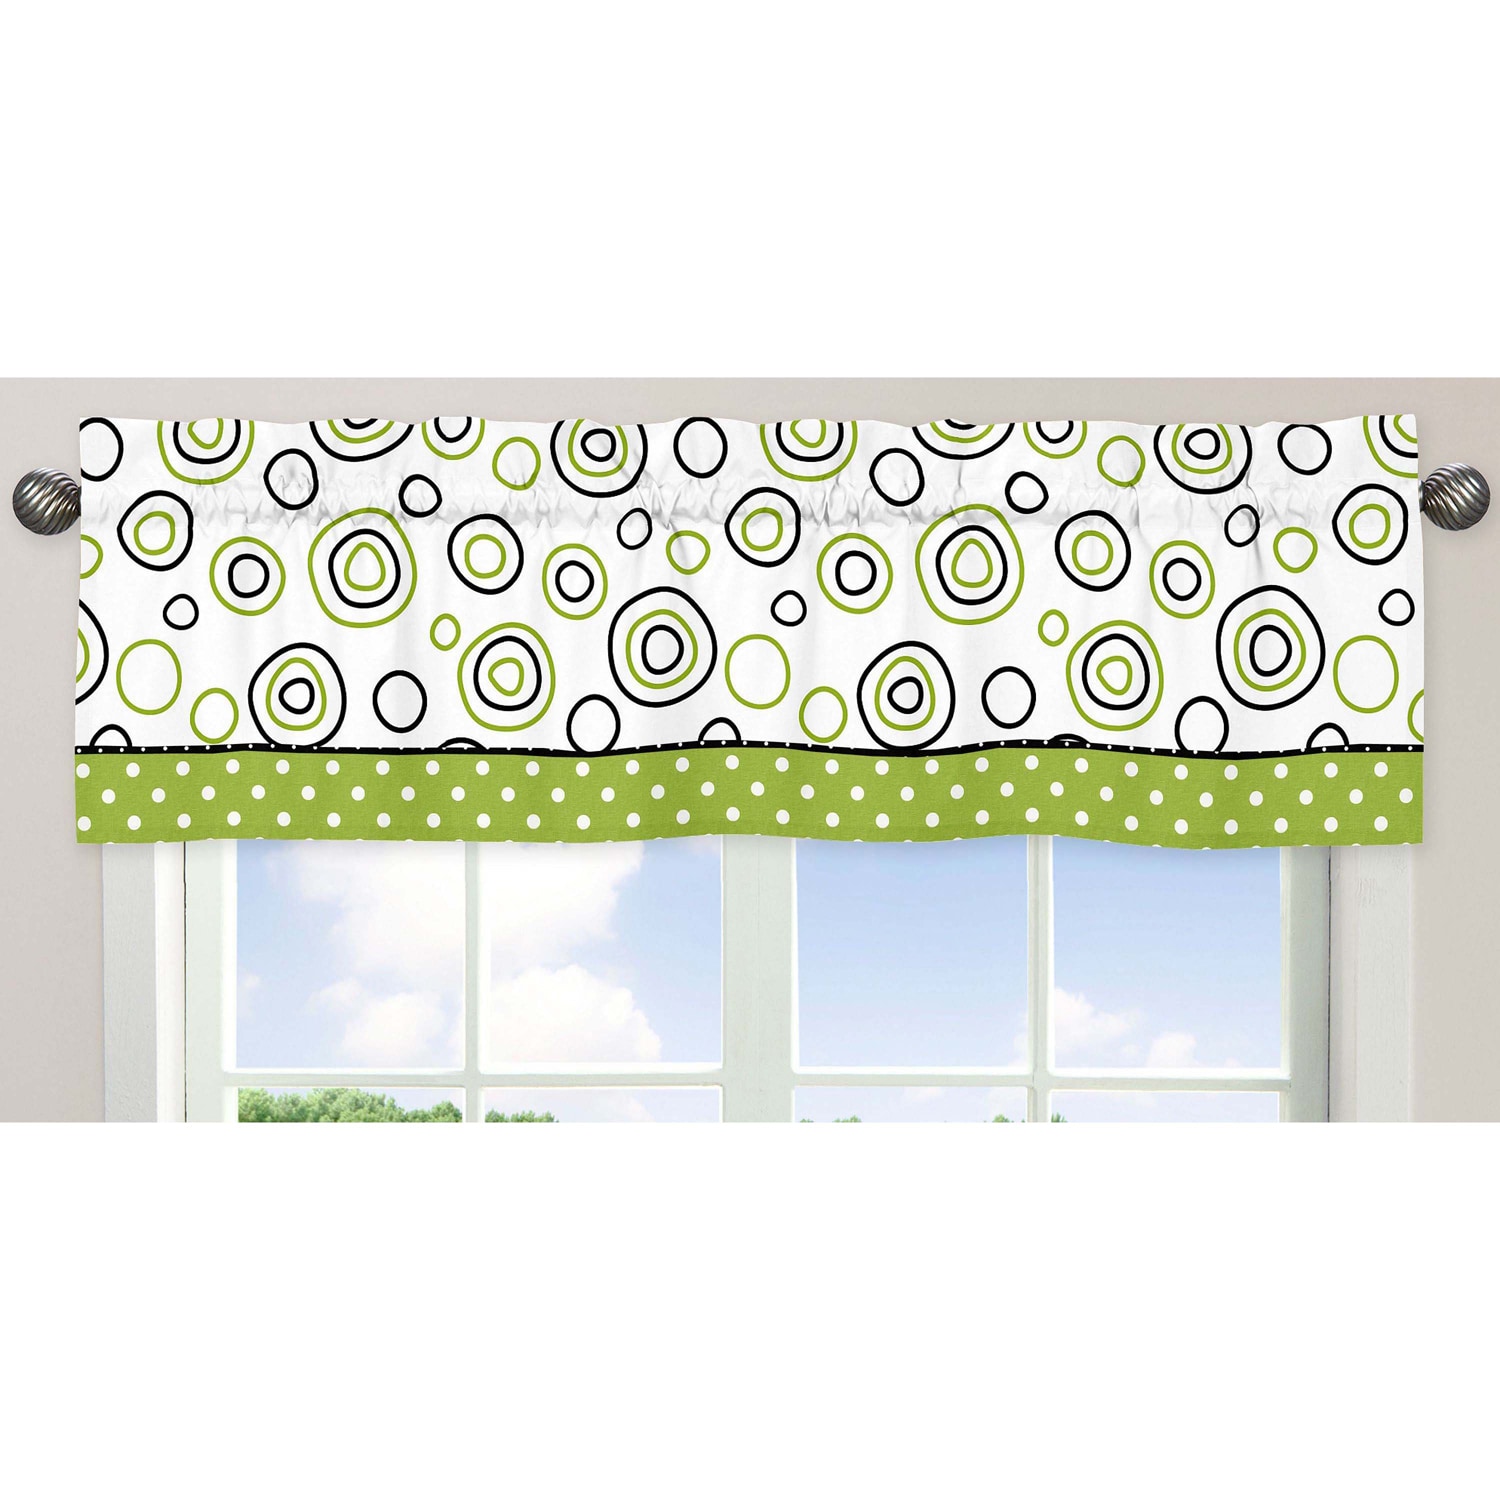 Engaging lime green window valance Sweet Jojo Designs Black White Lime 54 Inch X 15 Window Treatment Curtain Valance For Green And Overstock 7903040